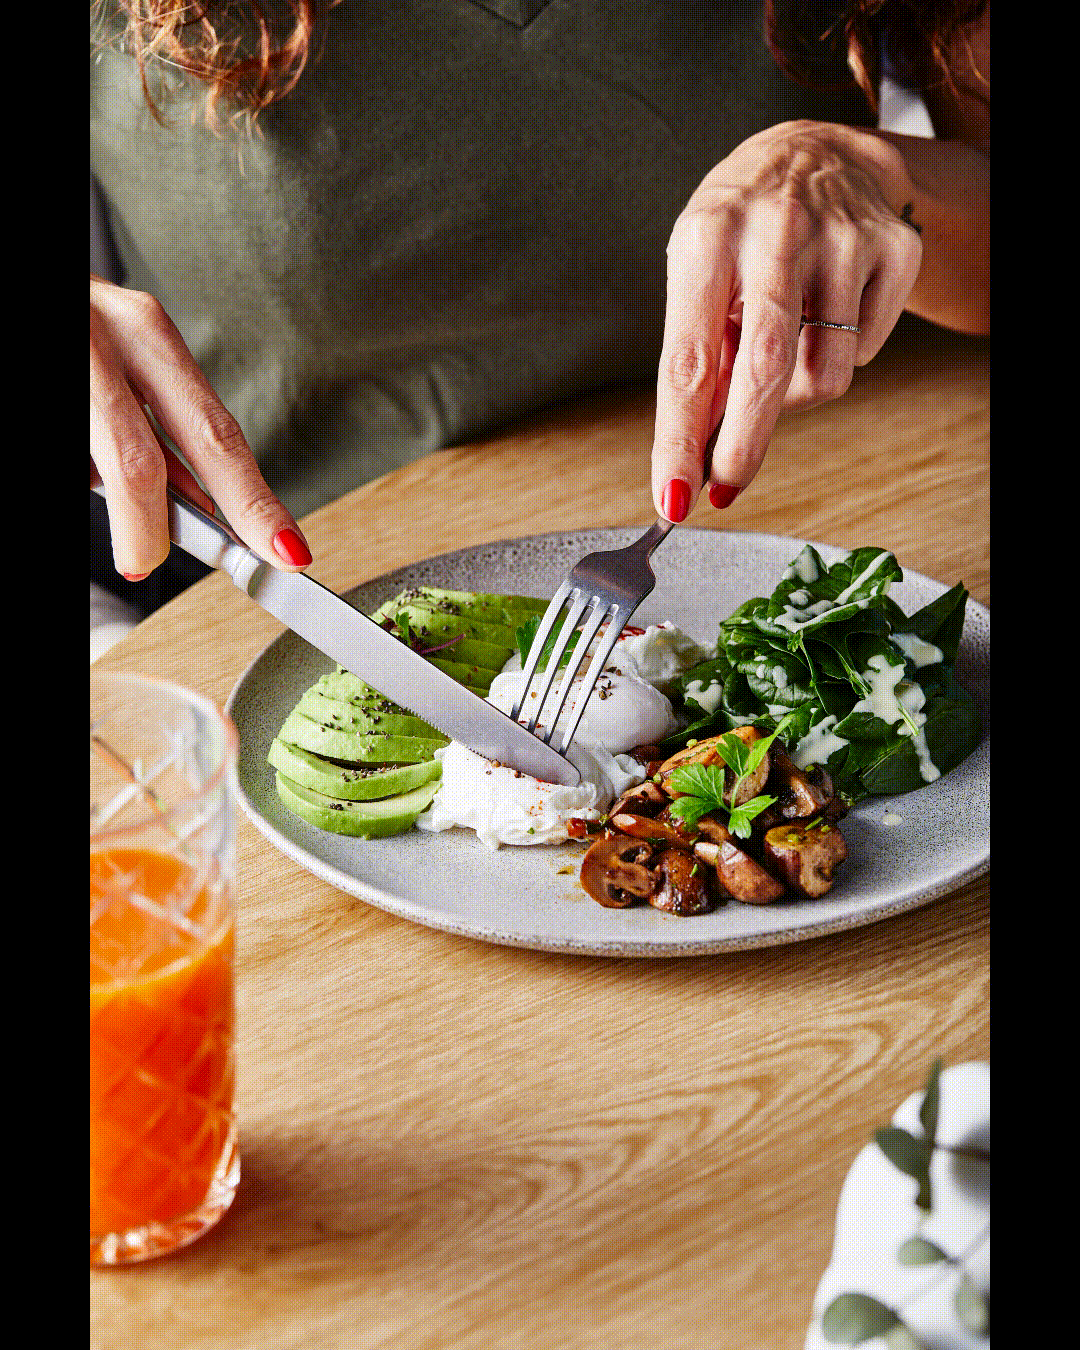 GIF of a poached egg being cut open on a plate with mushrooms, spinach, and avocado.